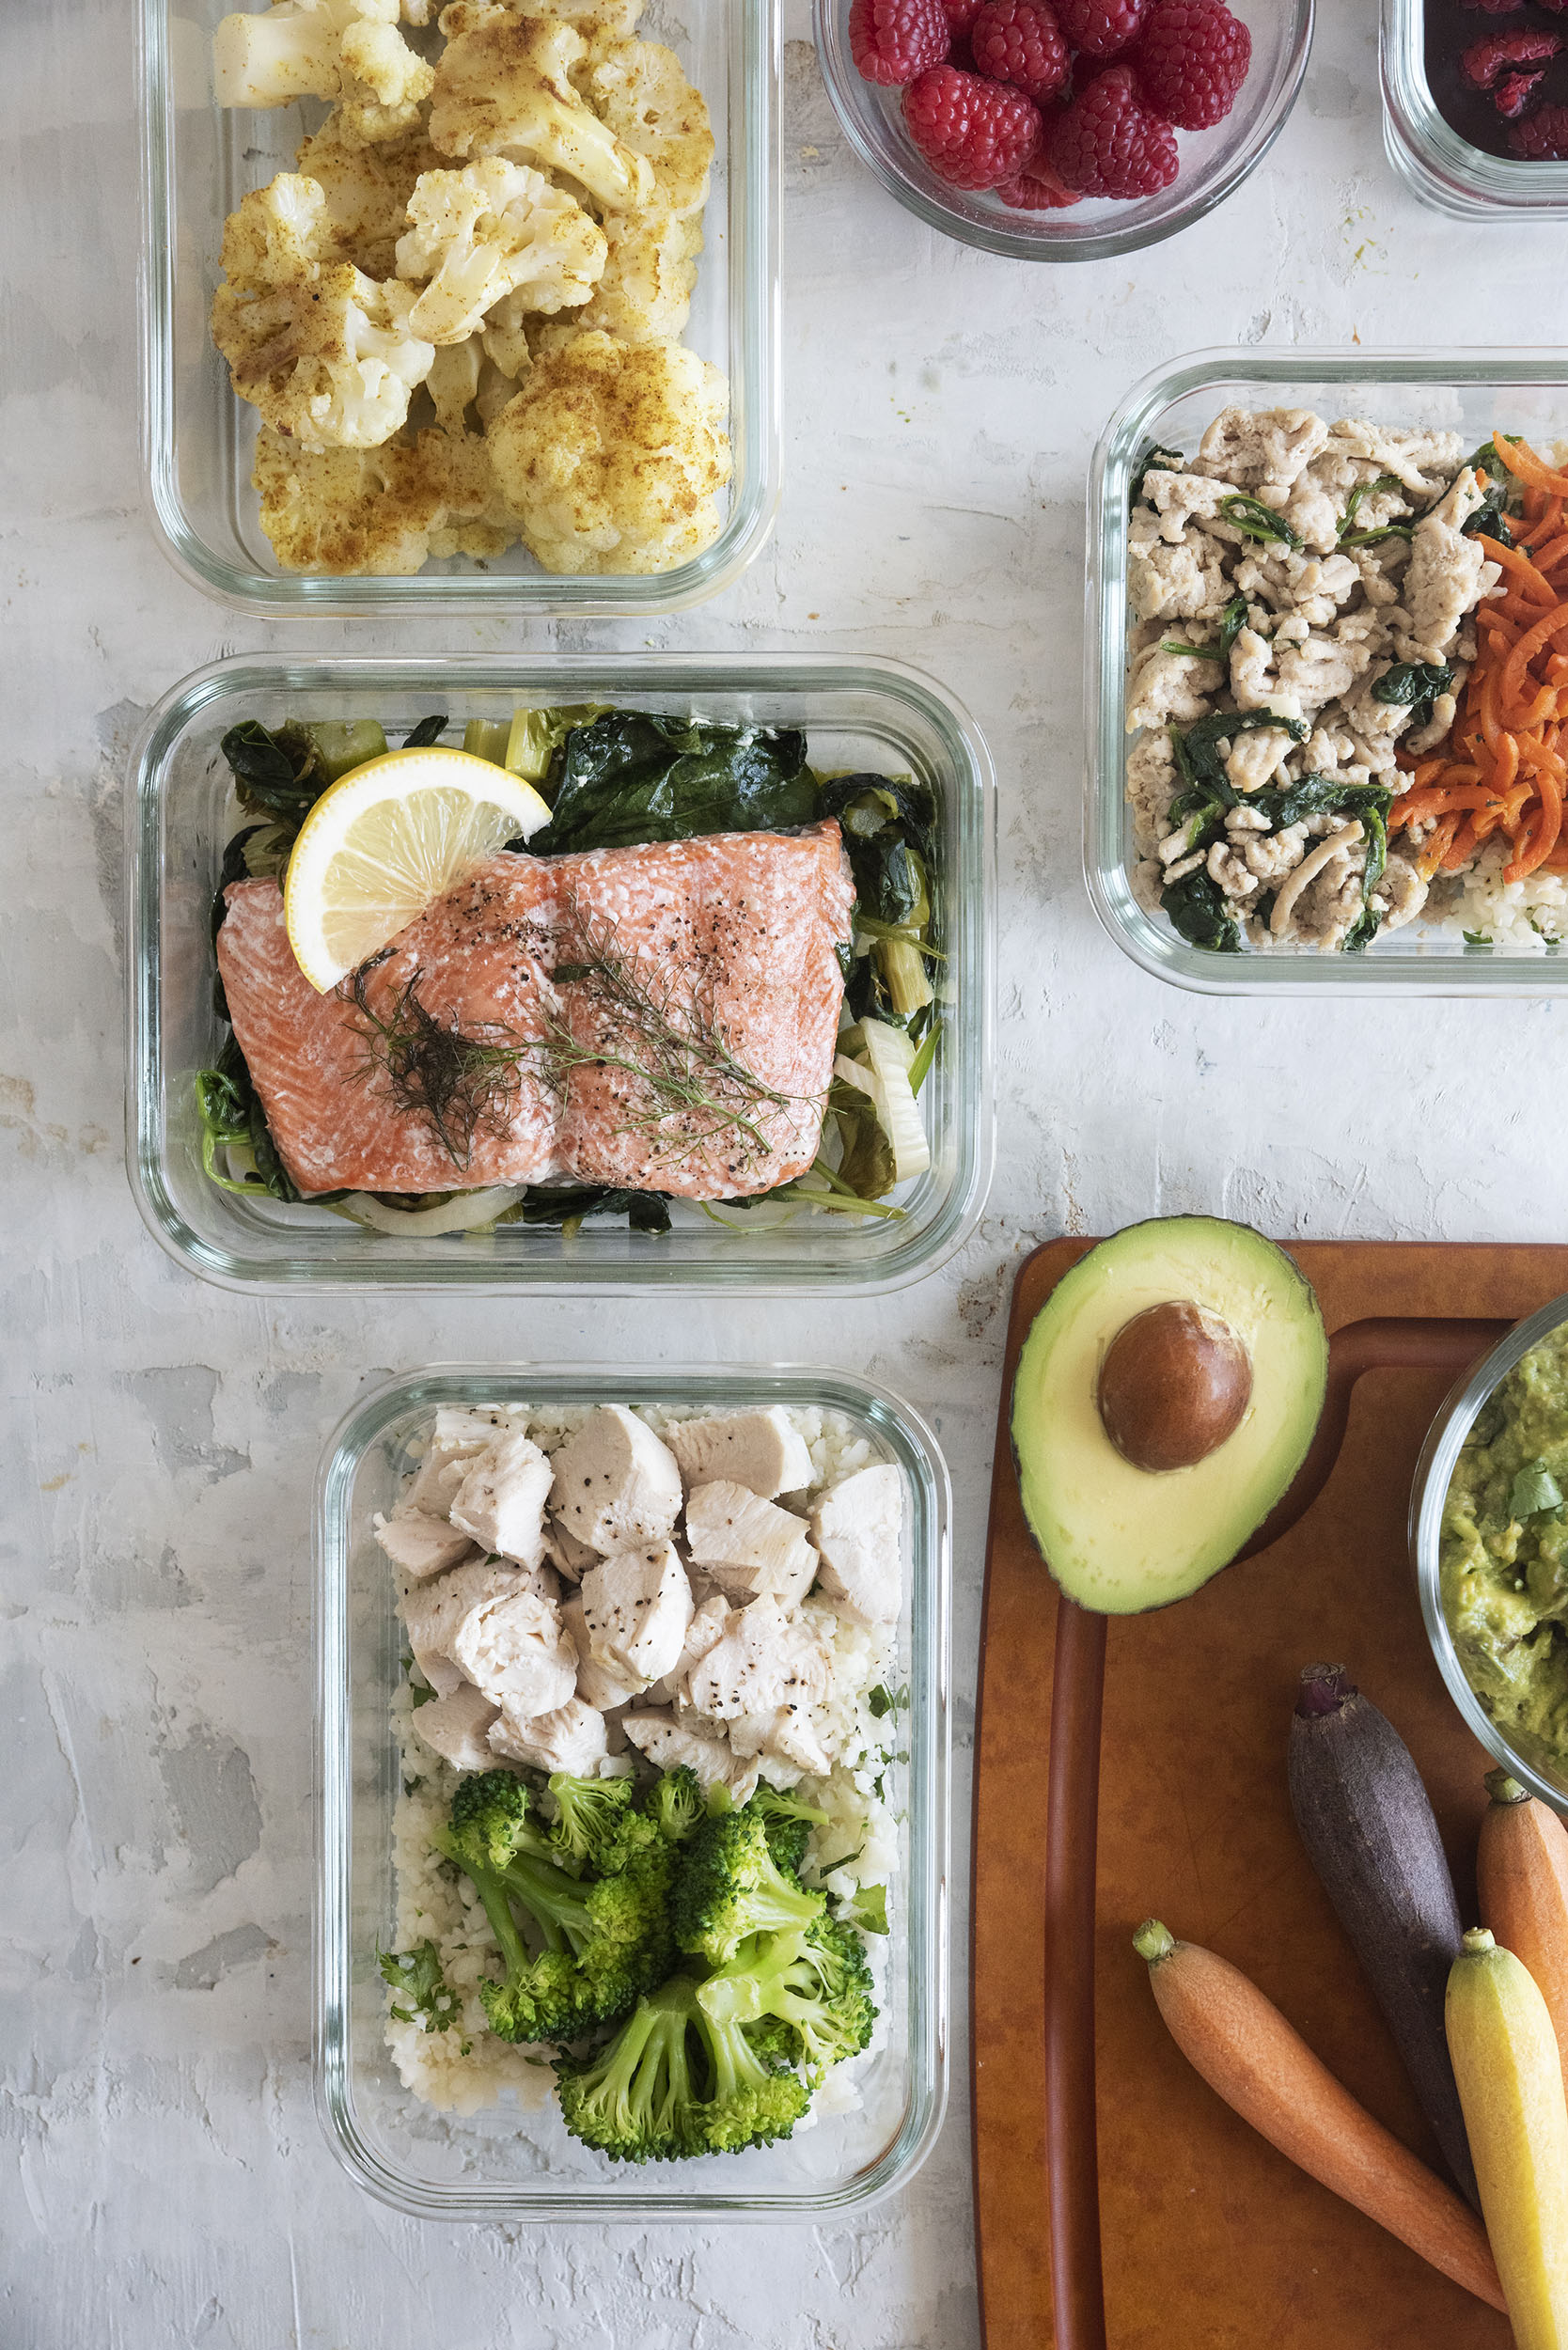 Glass containers to meal prep by Casa de Suna